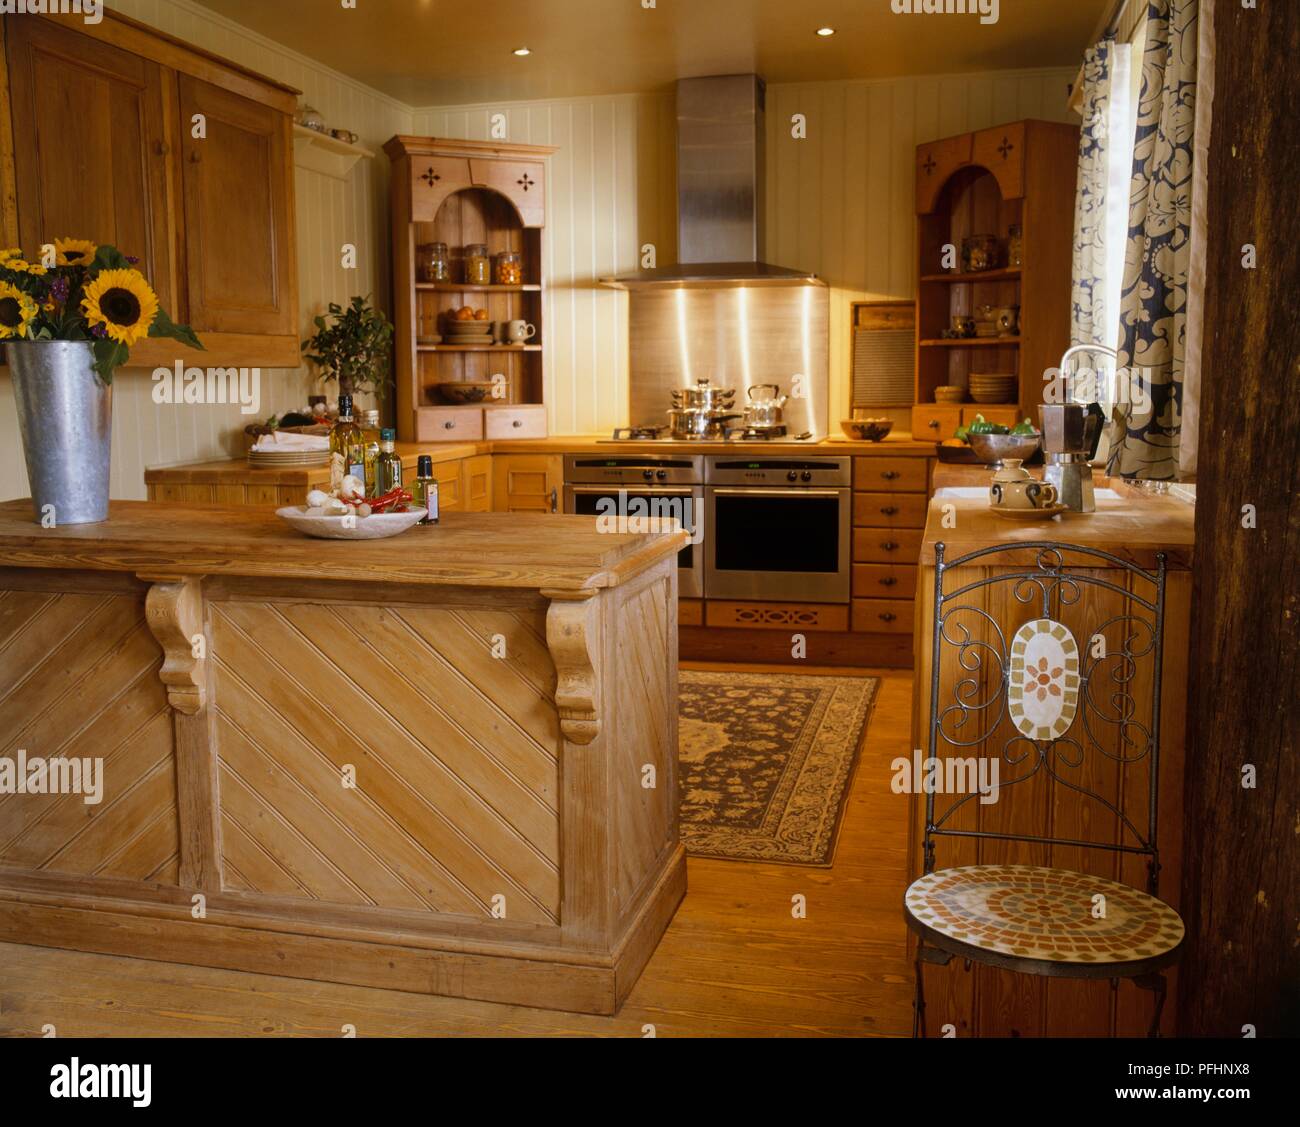 Fitted kitchen with wooden cupboards and floor Stock Photo